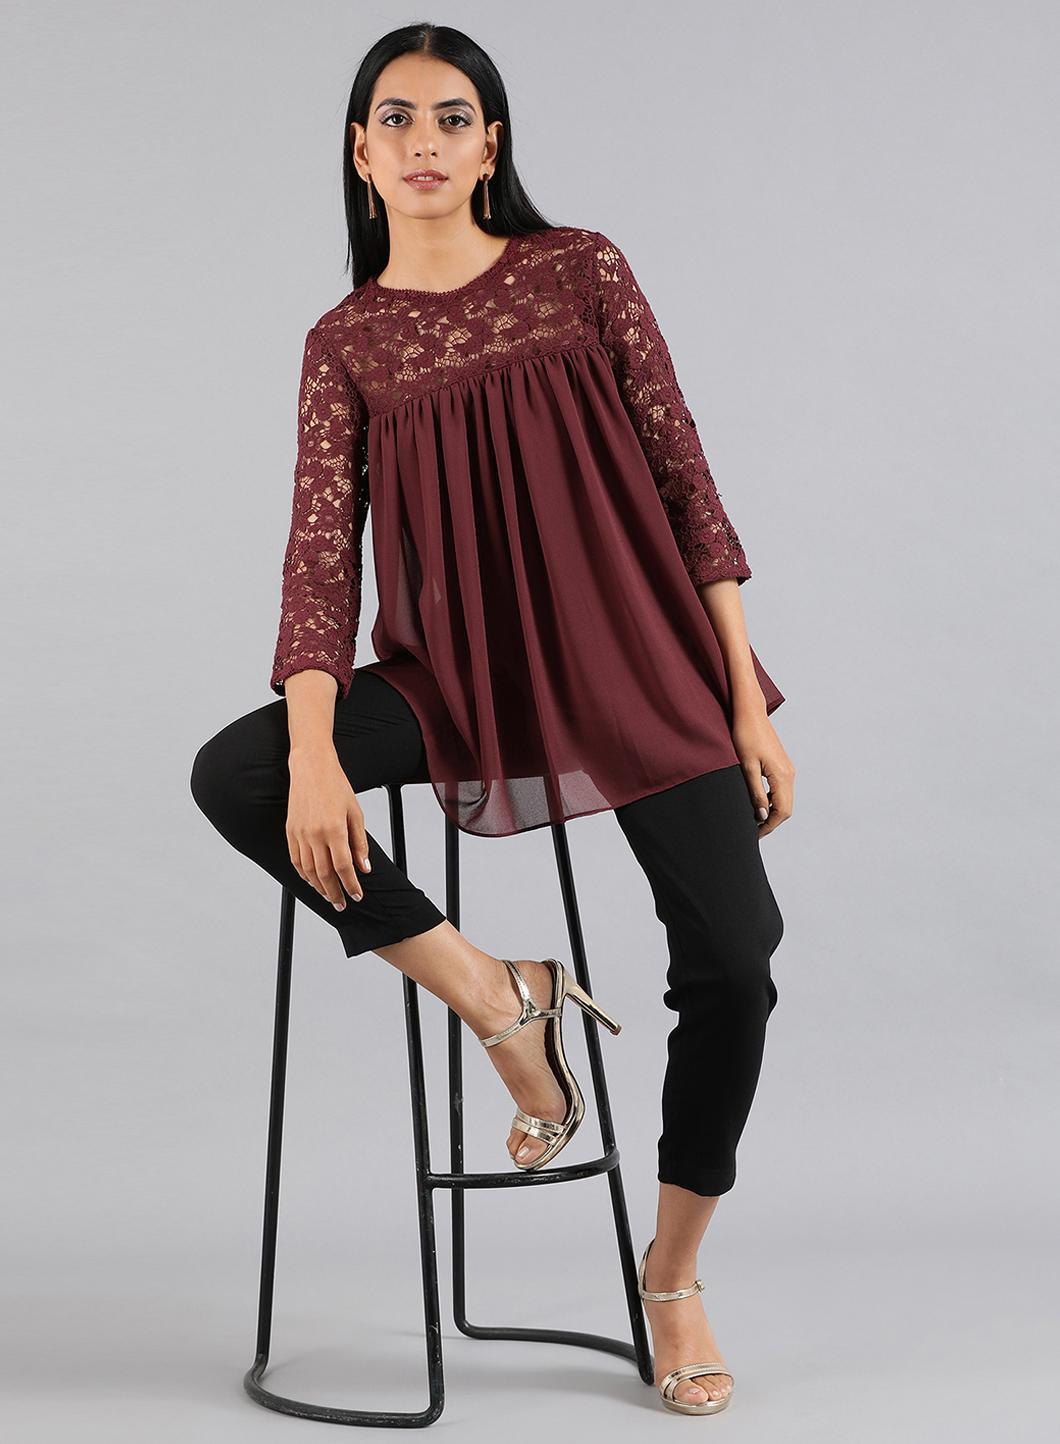 Wine Round Neck Lace Top - wforwoman